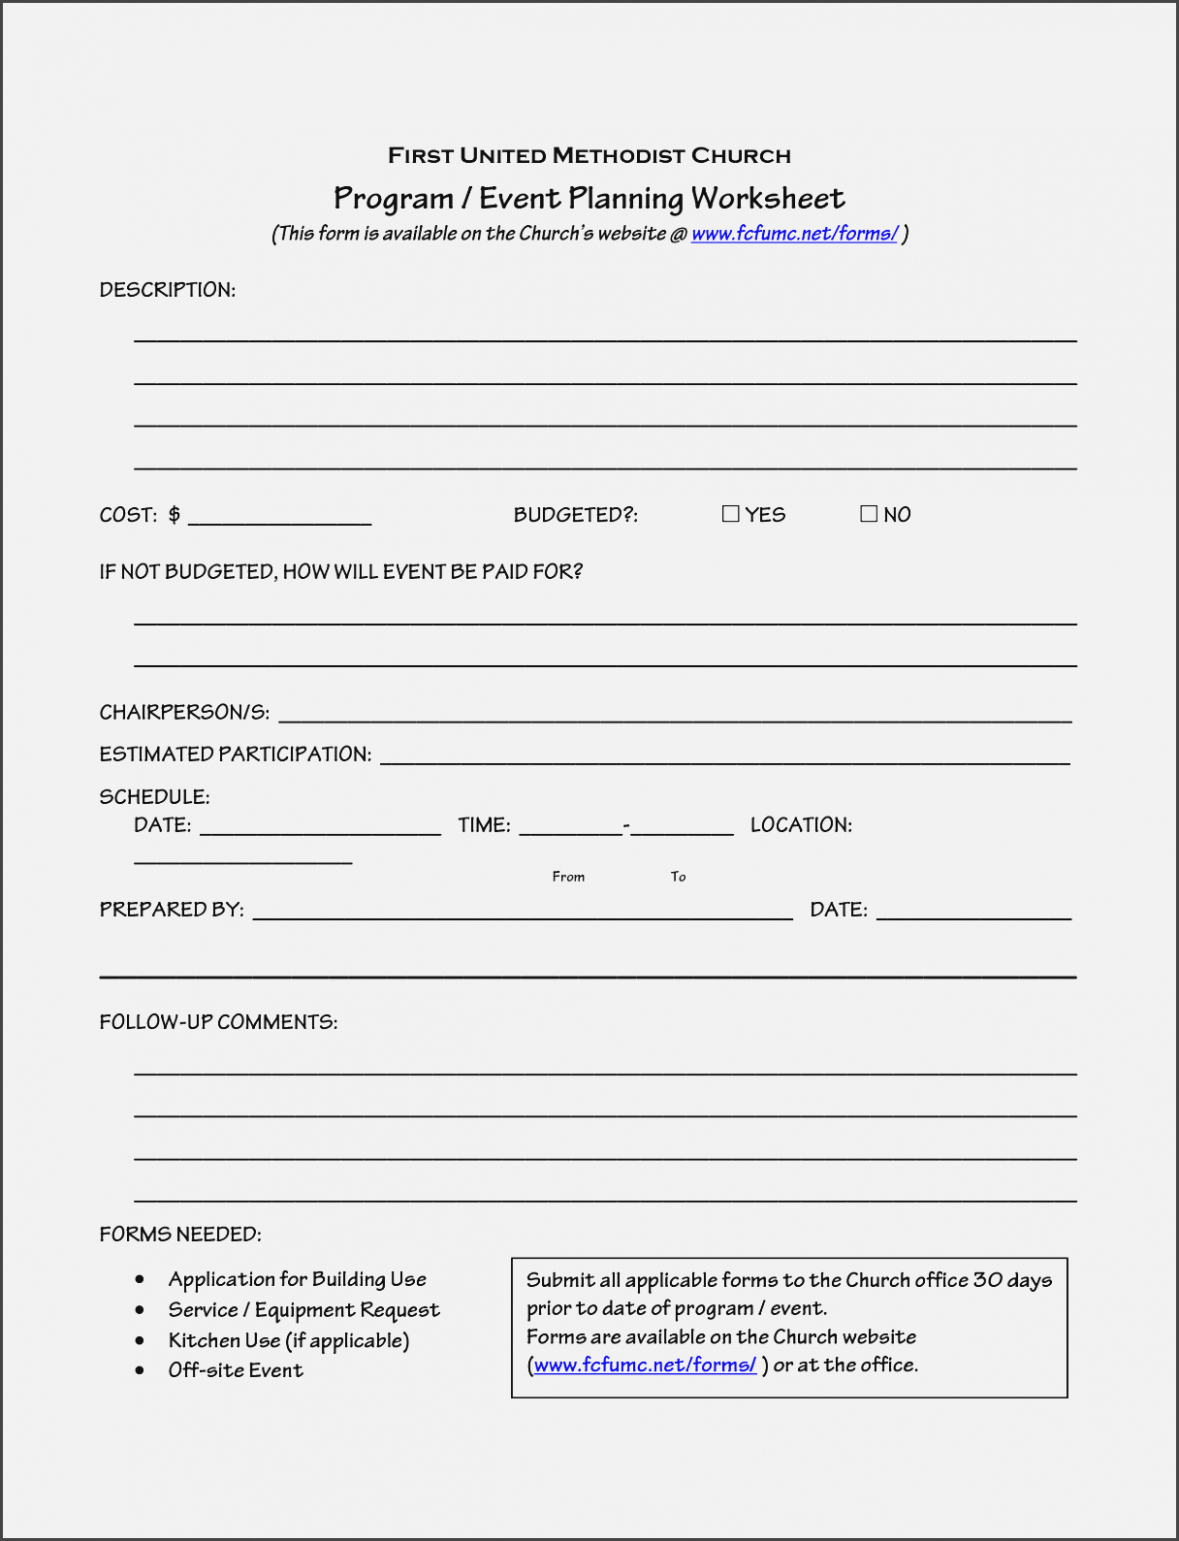 Ten Things You Need To  Realty Executives Mi  Invoice And Resume For Funeral Pre Planning Worksheet